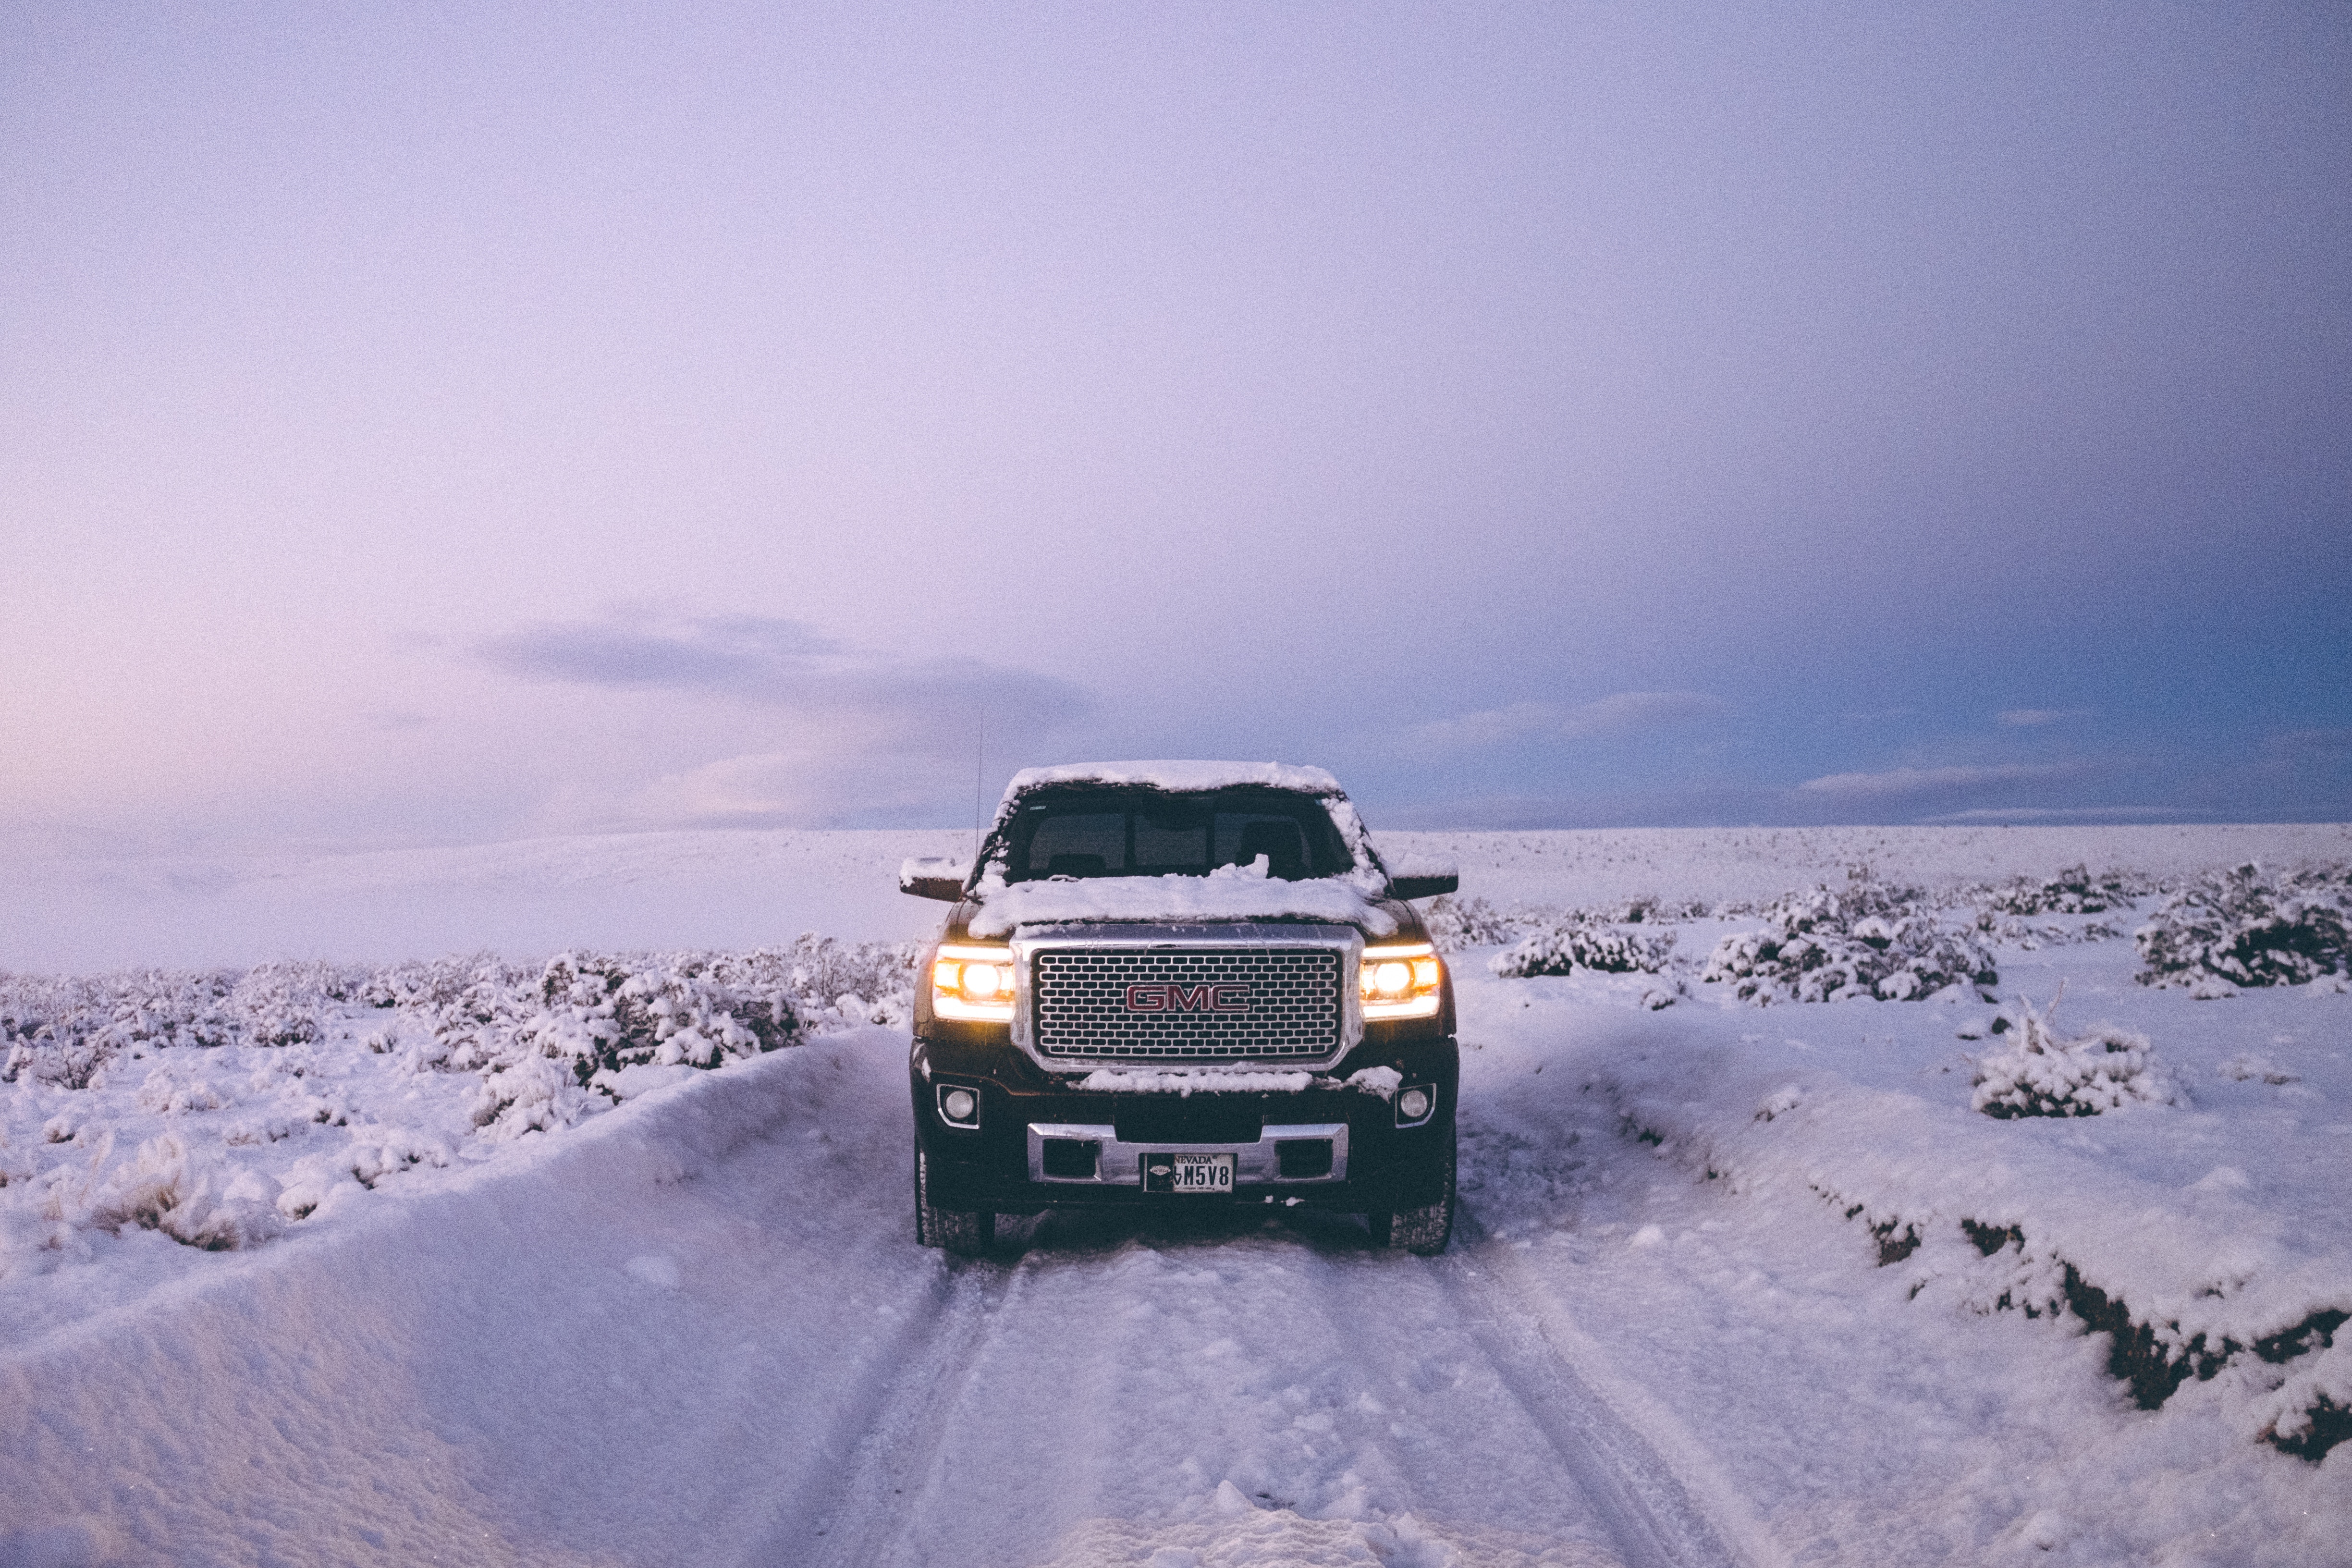 pickup, winter, snow, cars, black, suv, front view, off-road, impassability, gms sierra, gms 4K Ultra